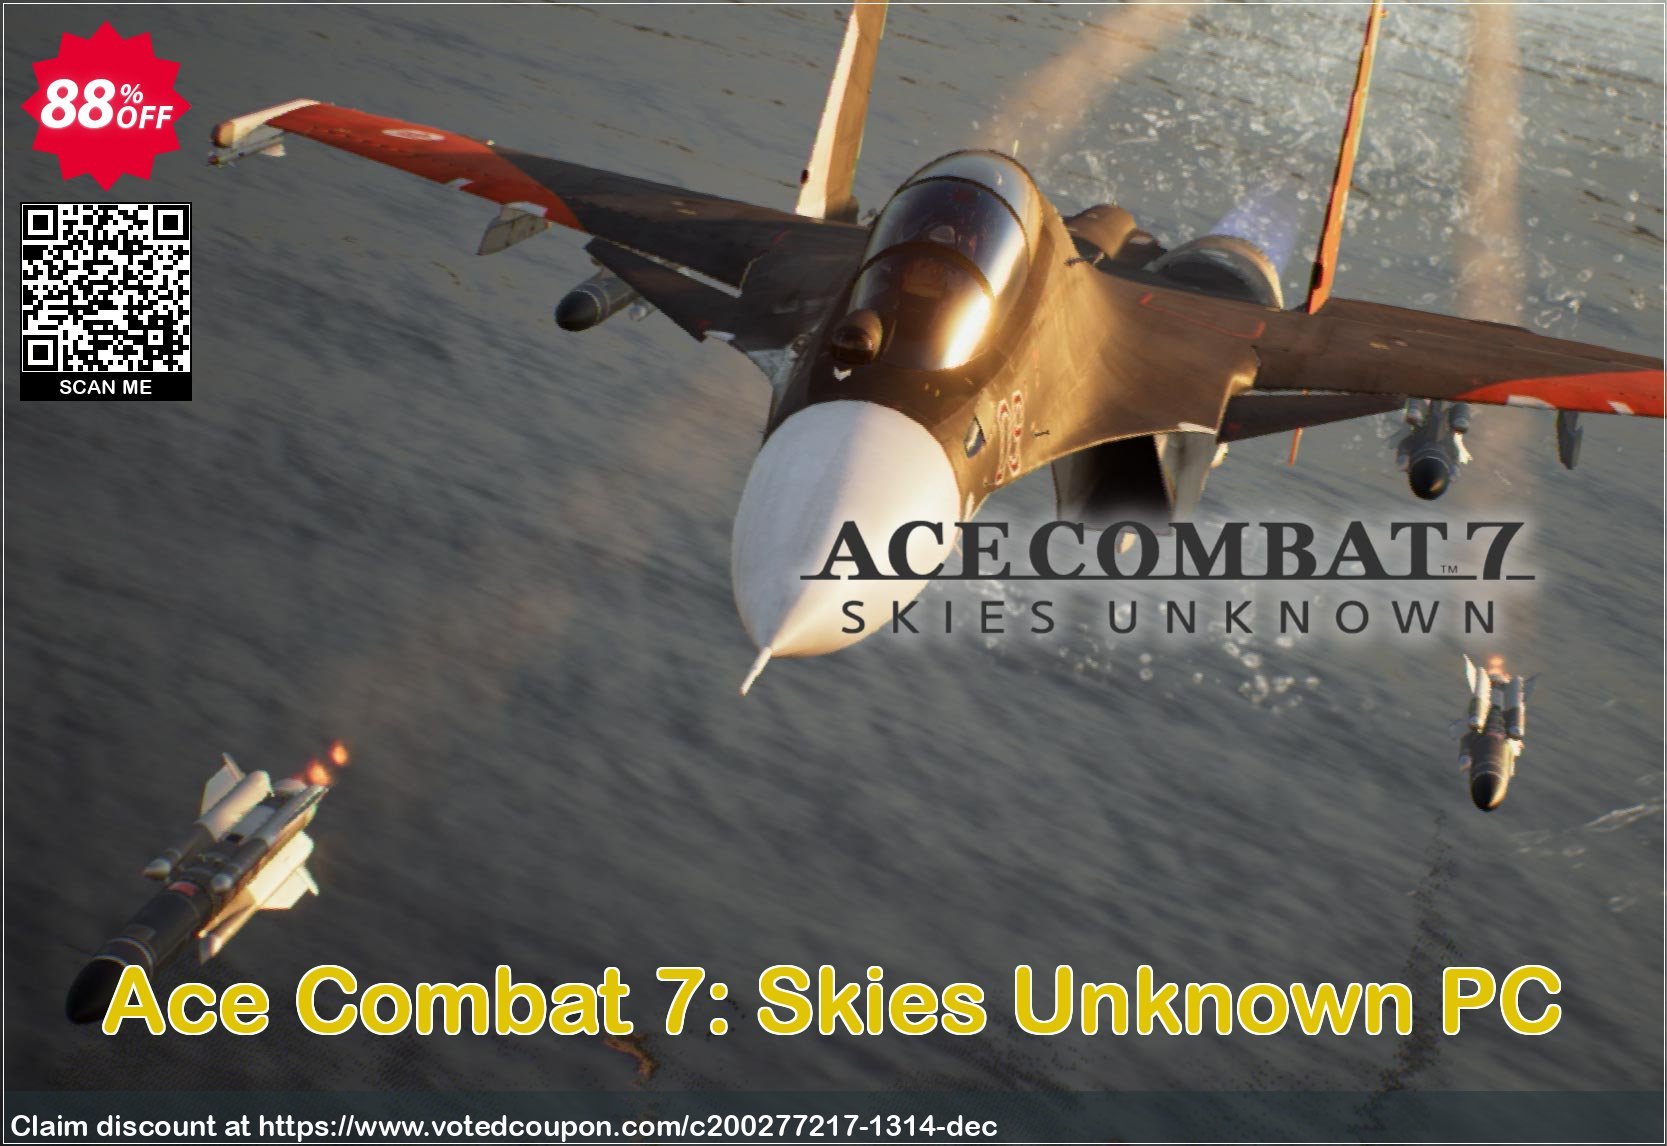 Ace Combat 7: Skies Unknown PC Coupon Code Apr 2024, 88% OFF - VotedCoupon